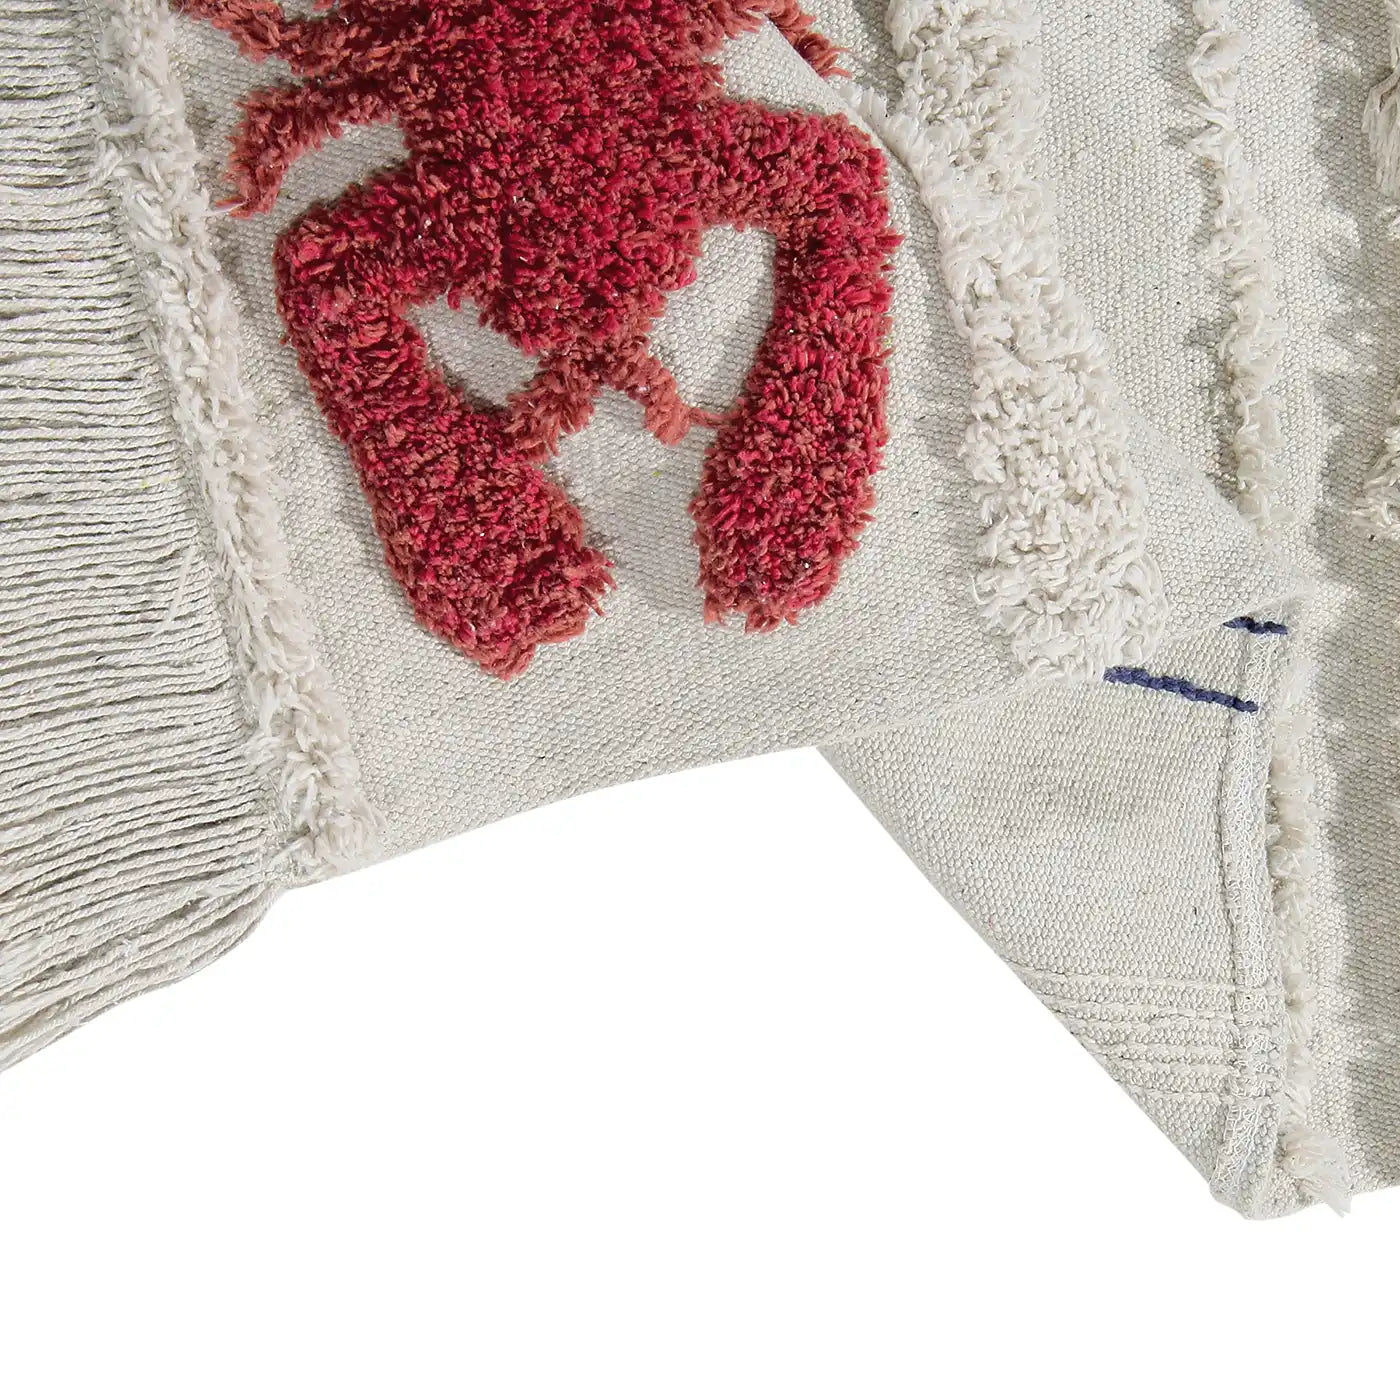 Lorena Canals Mini Lobster Washable Rug (Lobster Collection)